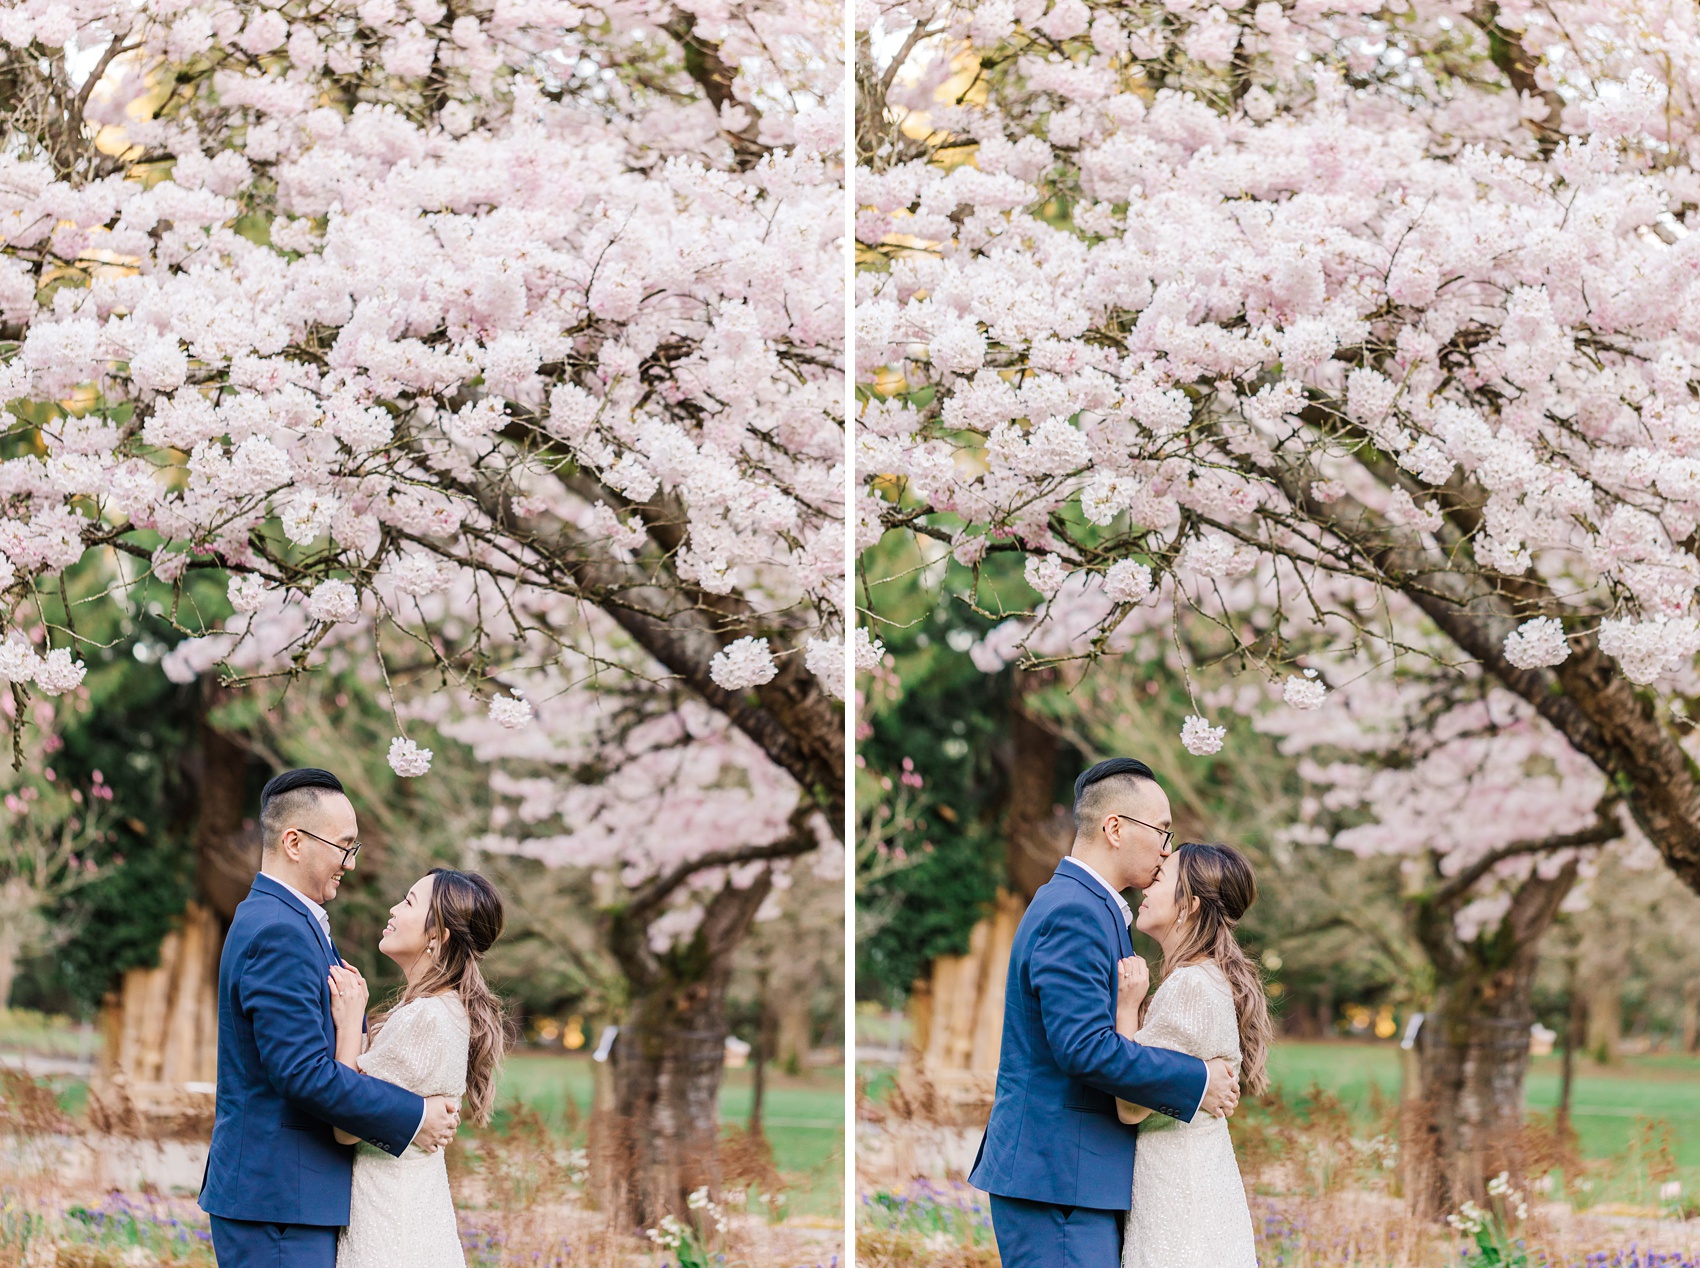 Stanley Park Cherry Blossoms engagement photo in Vancouver, BC, bride and groom under a big  Akebono cherry blossom tree